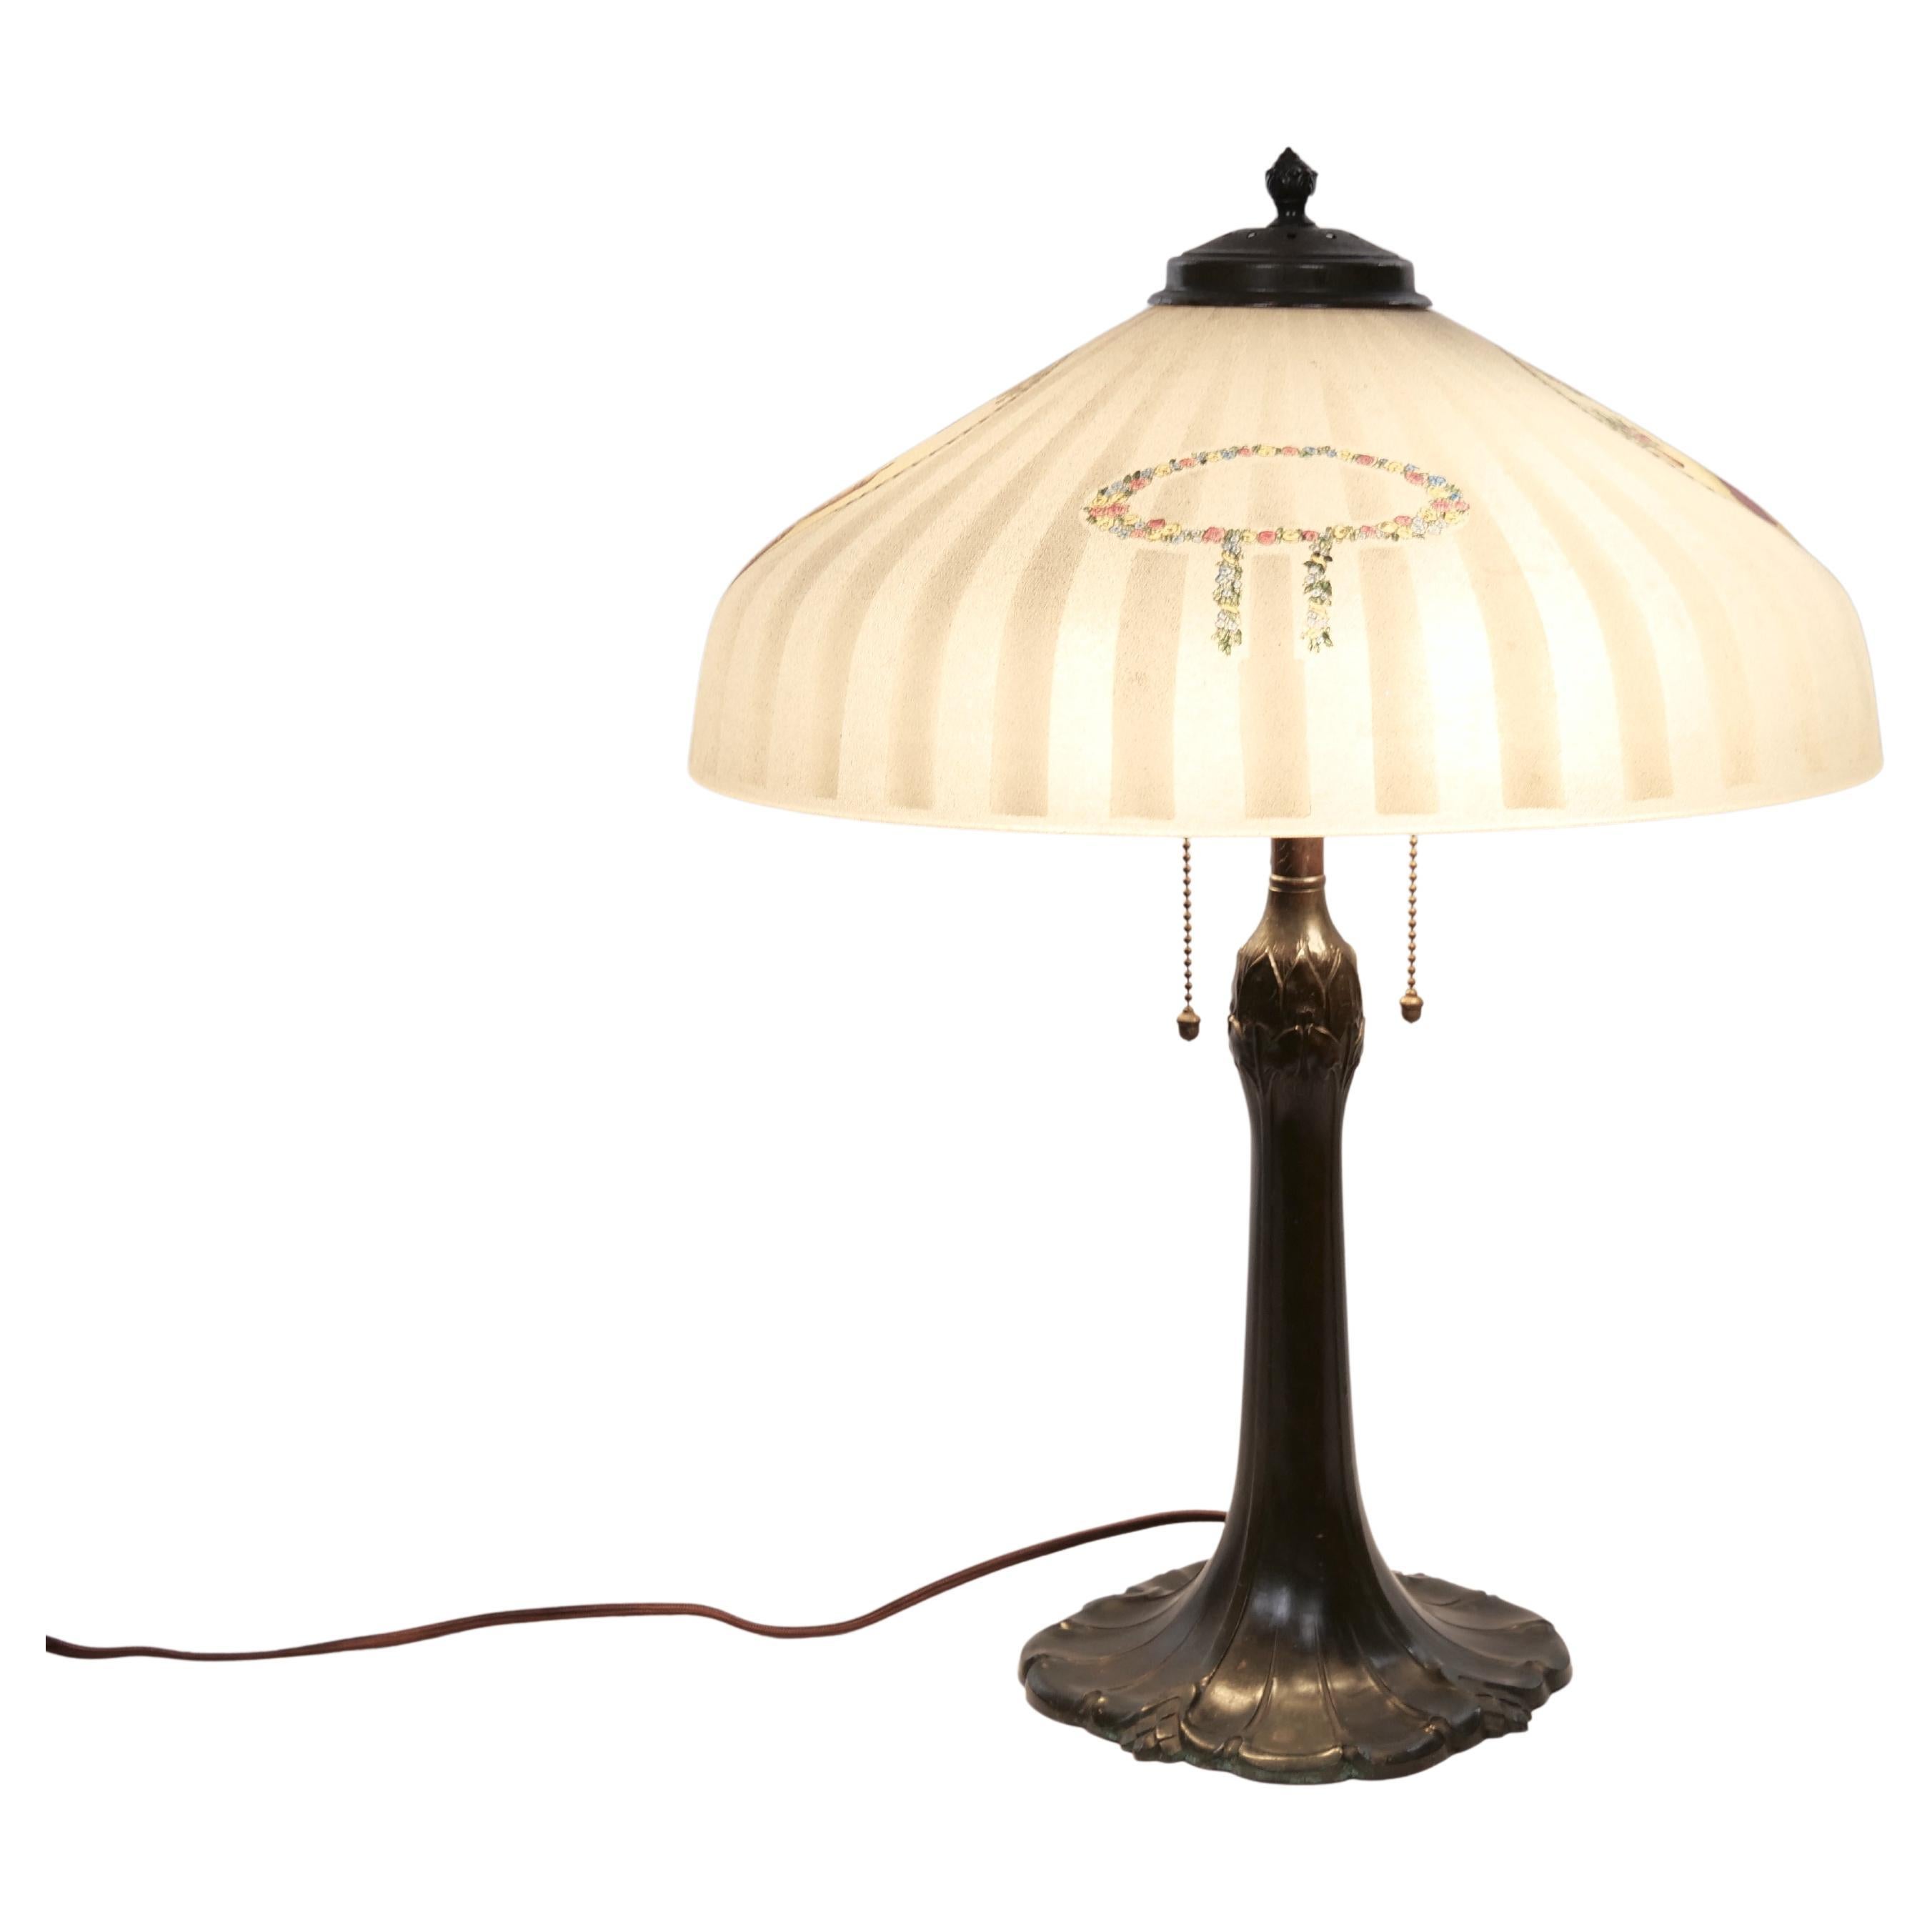 Late 19th century bronze base /reverse hand painted frosted glass shade table lamp. The lamp is in good working condition. Minor wear appropriate with age / use. It measures 21 inches high.
 